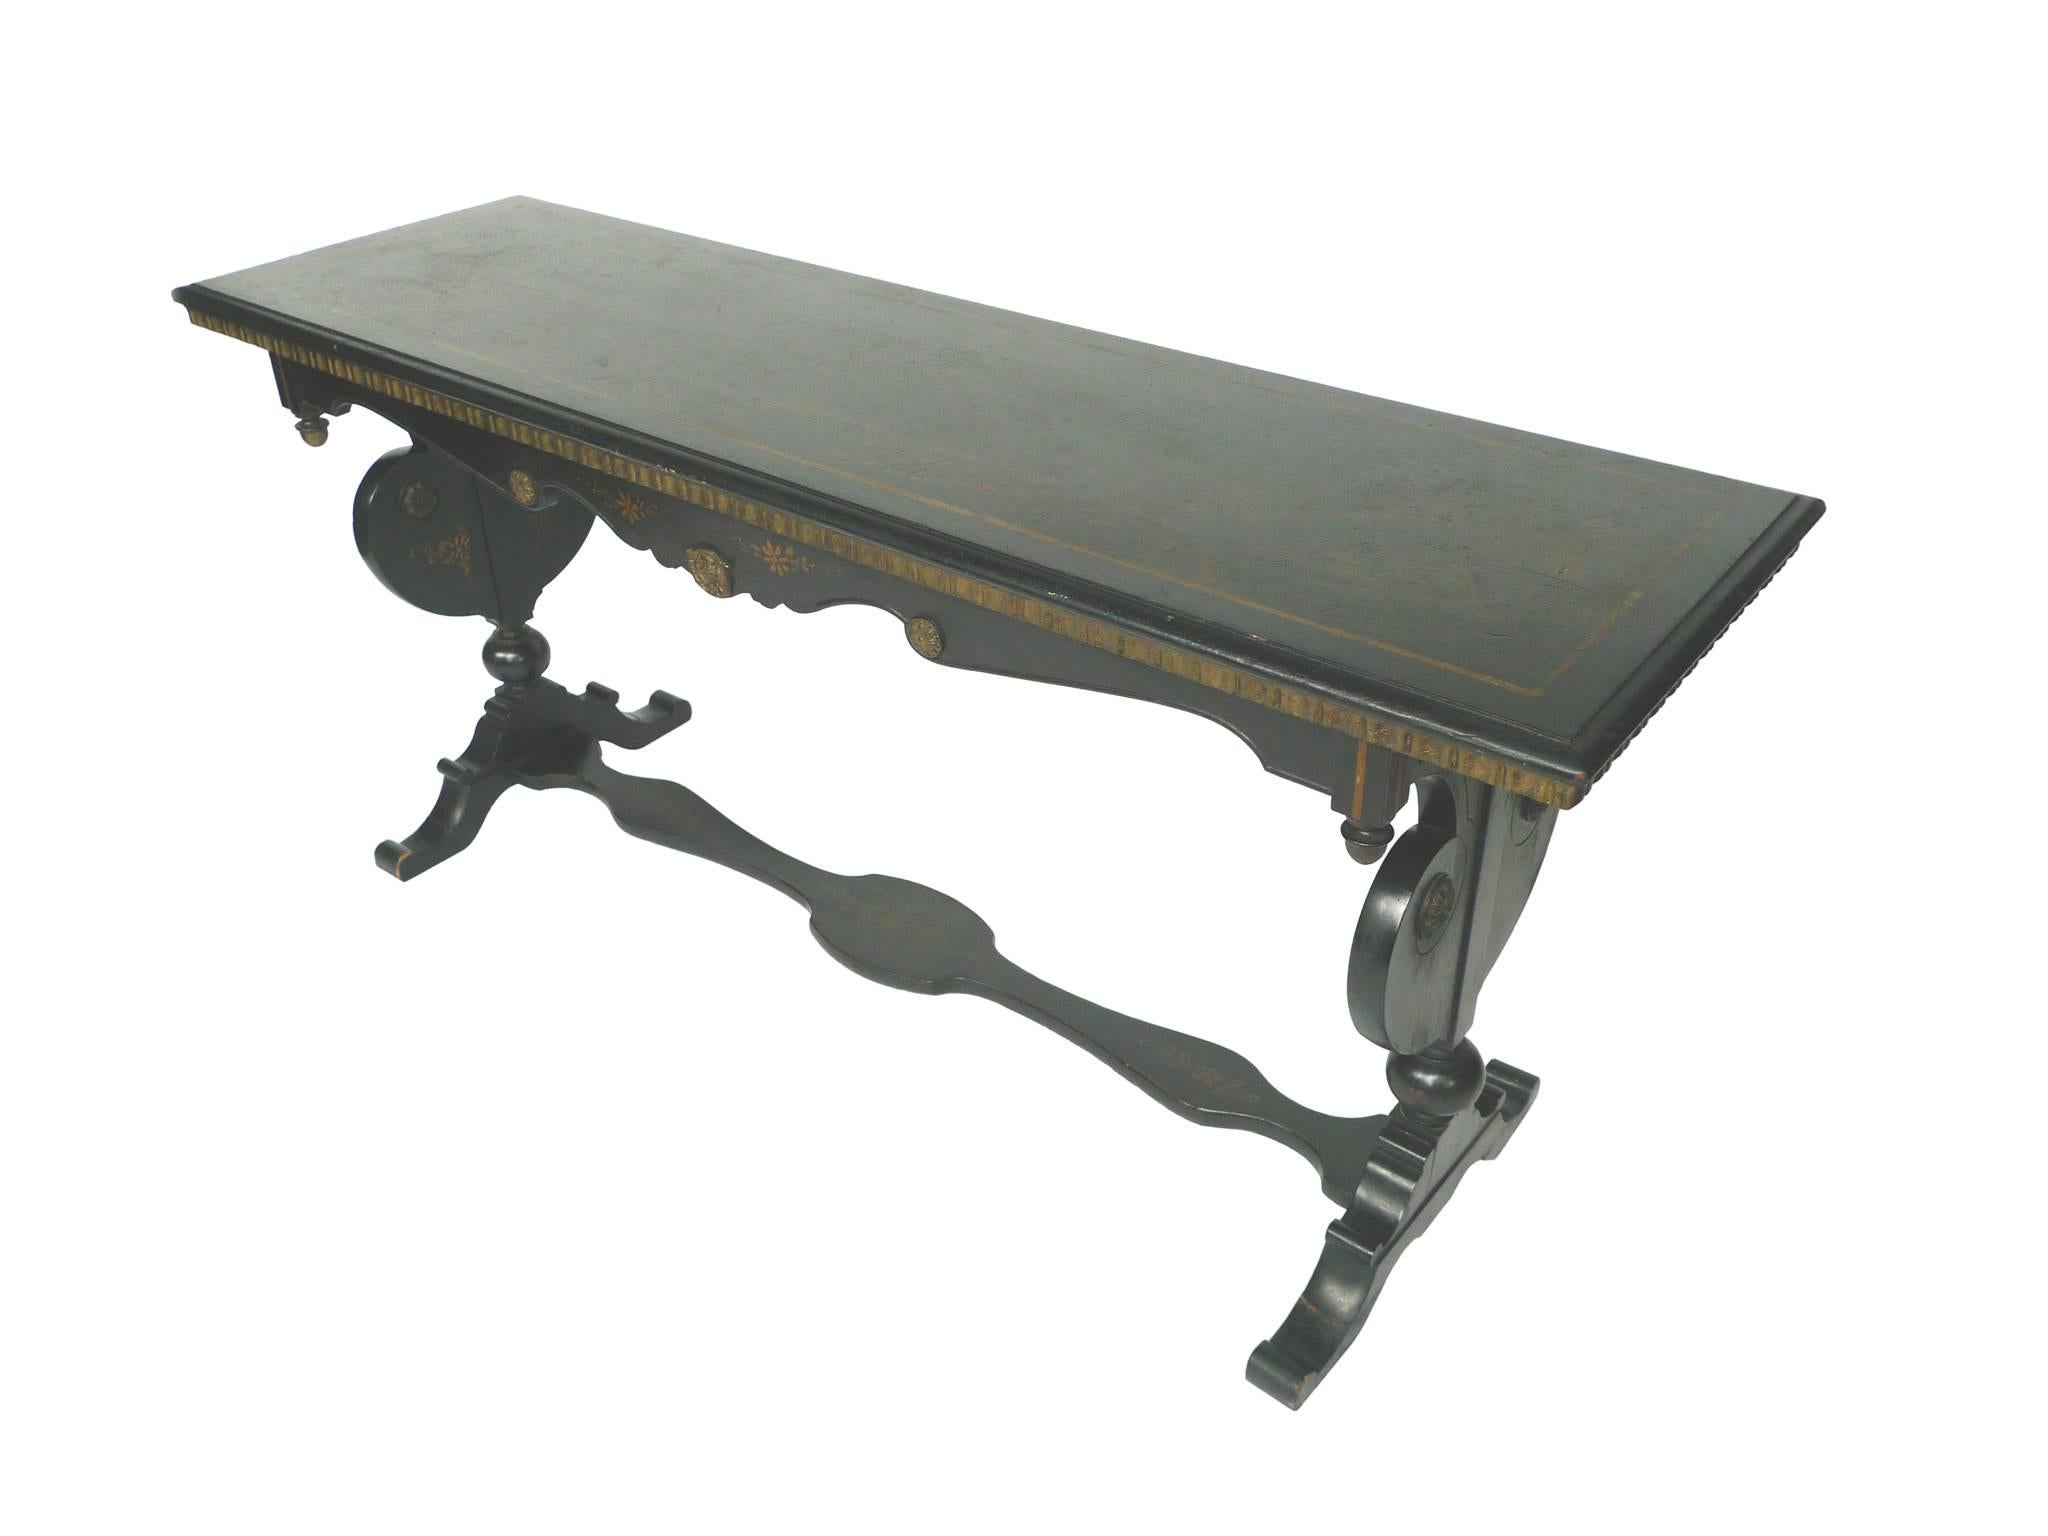 This 1940s chinoiserie console table is ebonized wood. Giltwood detailing adorns the skirt, surfaces, and legs, while a pastoral landscape is subtly painted on the tabletop, framed by a gilt border. The baluster legs are supported by a flat-topped